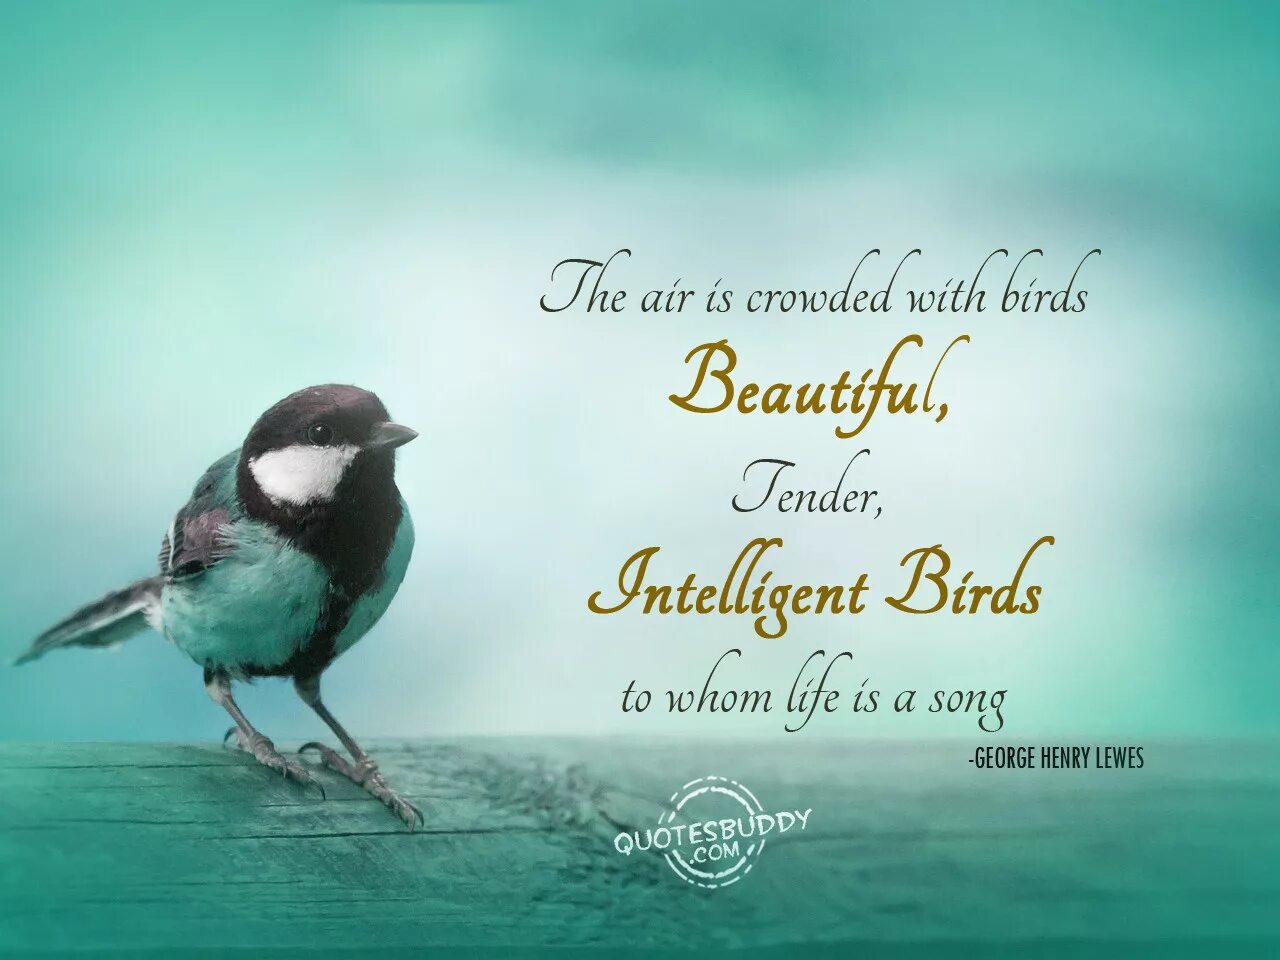 Quotes with Birds. Quotes about Birds. Beautiful Birds бренд. Quotes about early Birds.